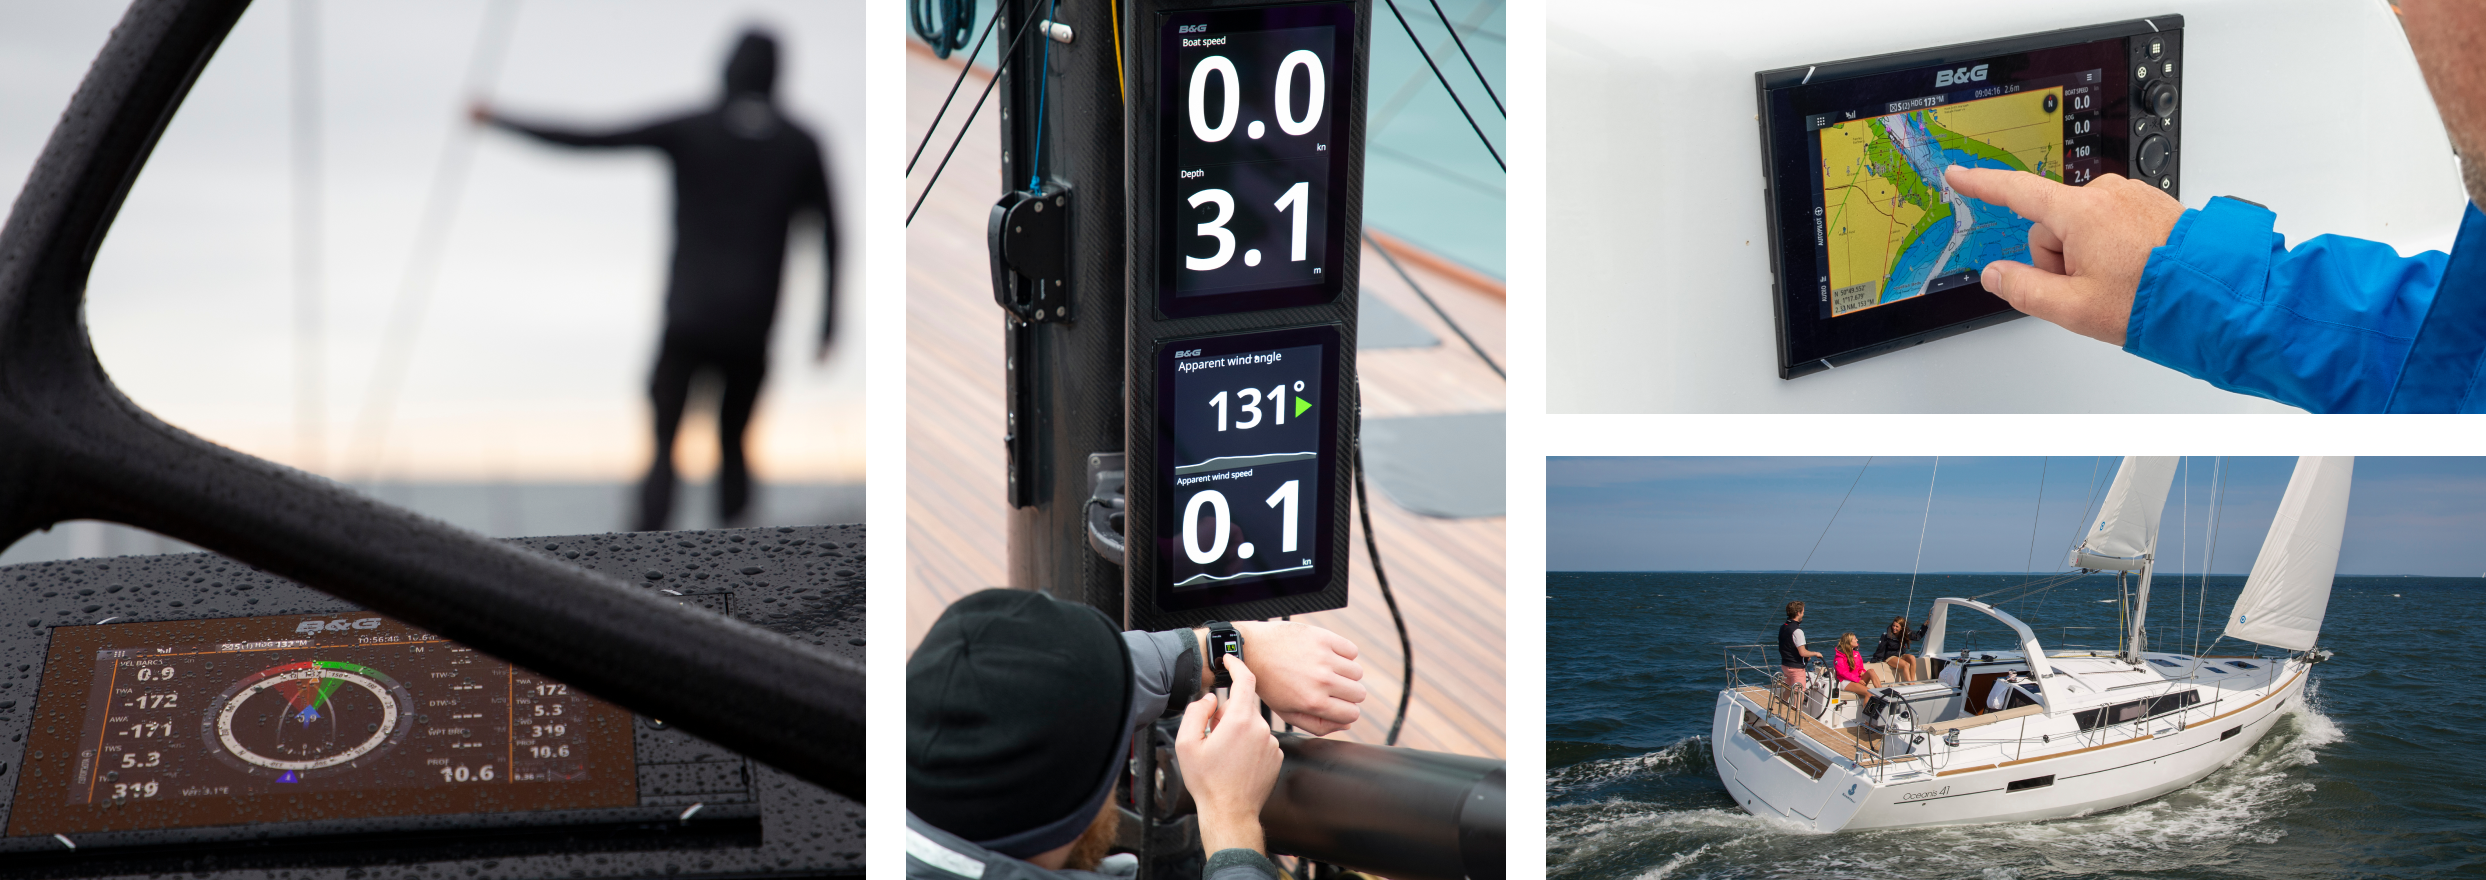 A B&G® sailing display showing data on screen.  A person measuring the speed, depth, wind speed and wind angle with B&G® sailing instruments.  A person navigating using B&G® sailing displays.  People sailing on a sailboat. 